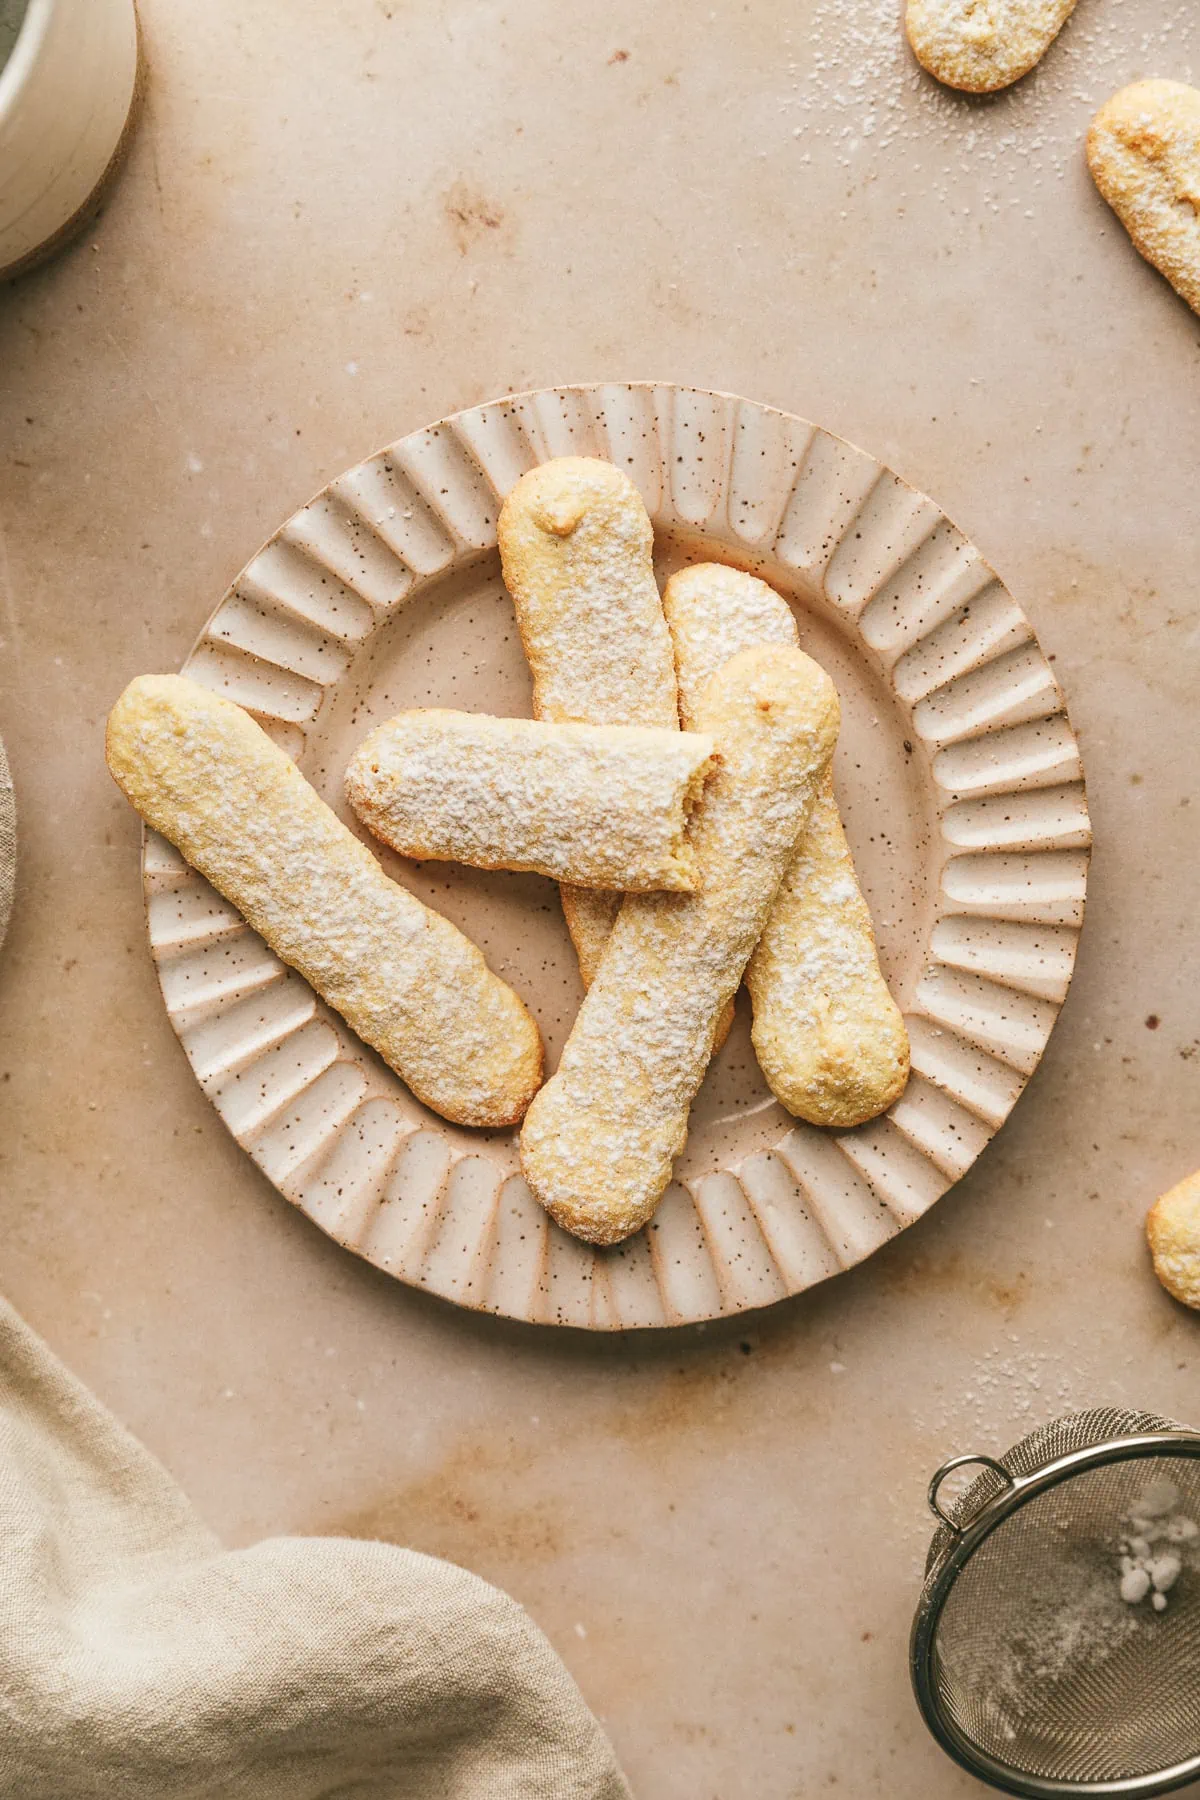 Five sugar-free ladyfingers on a rimmed plate on a beige marble surface.